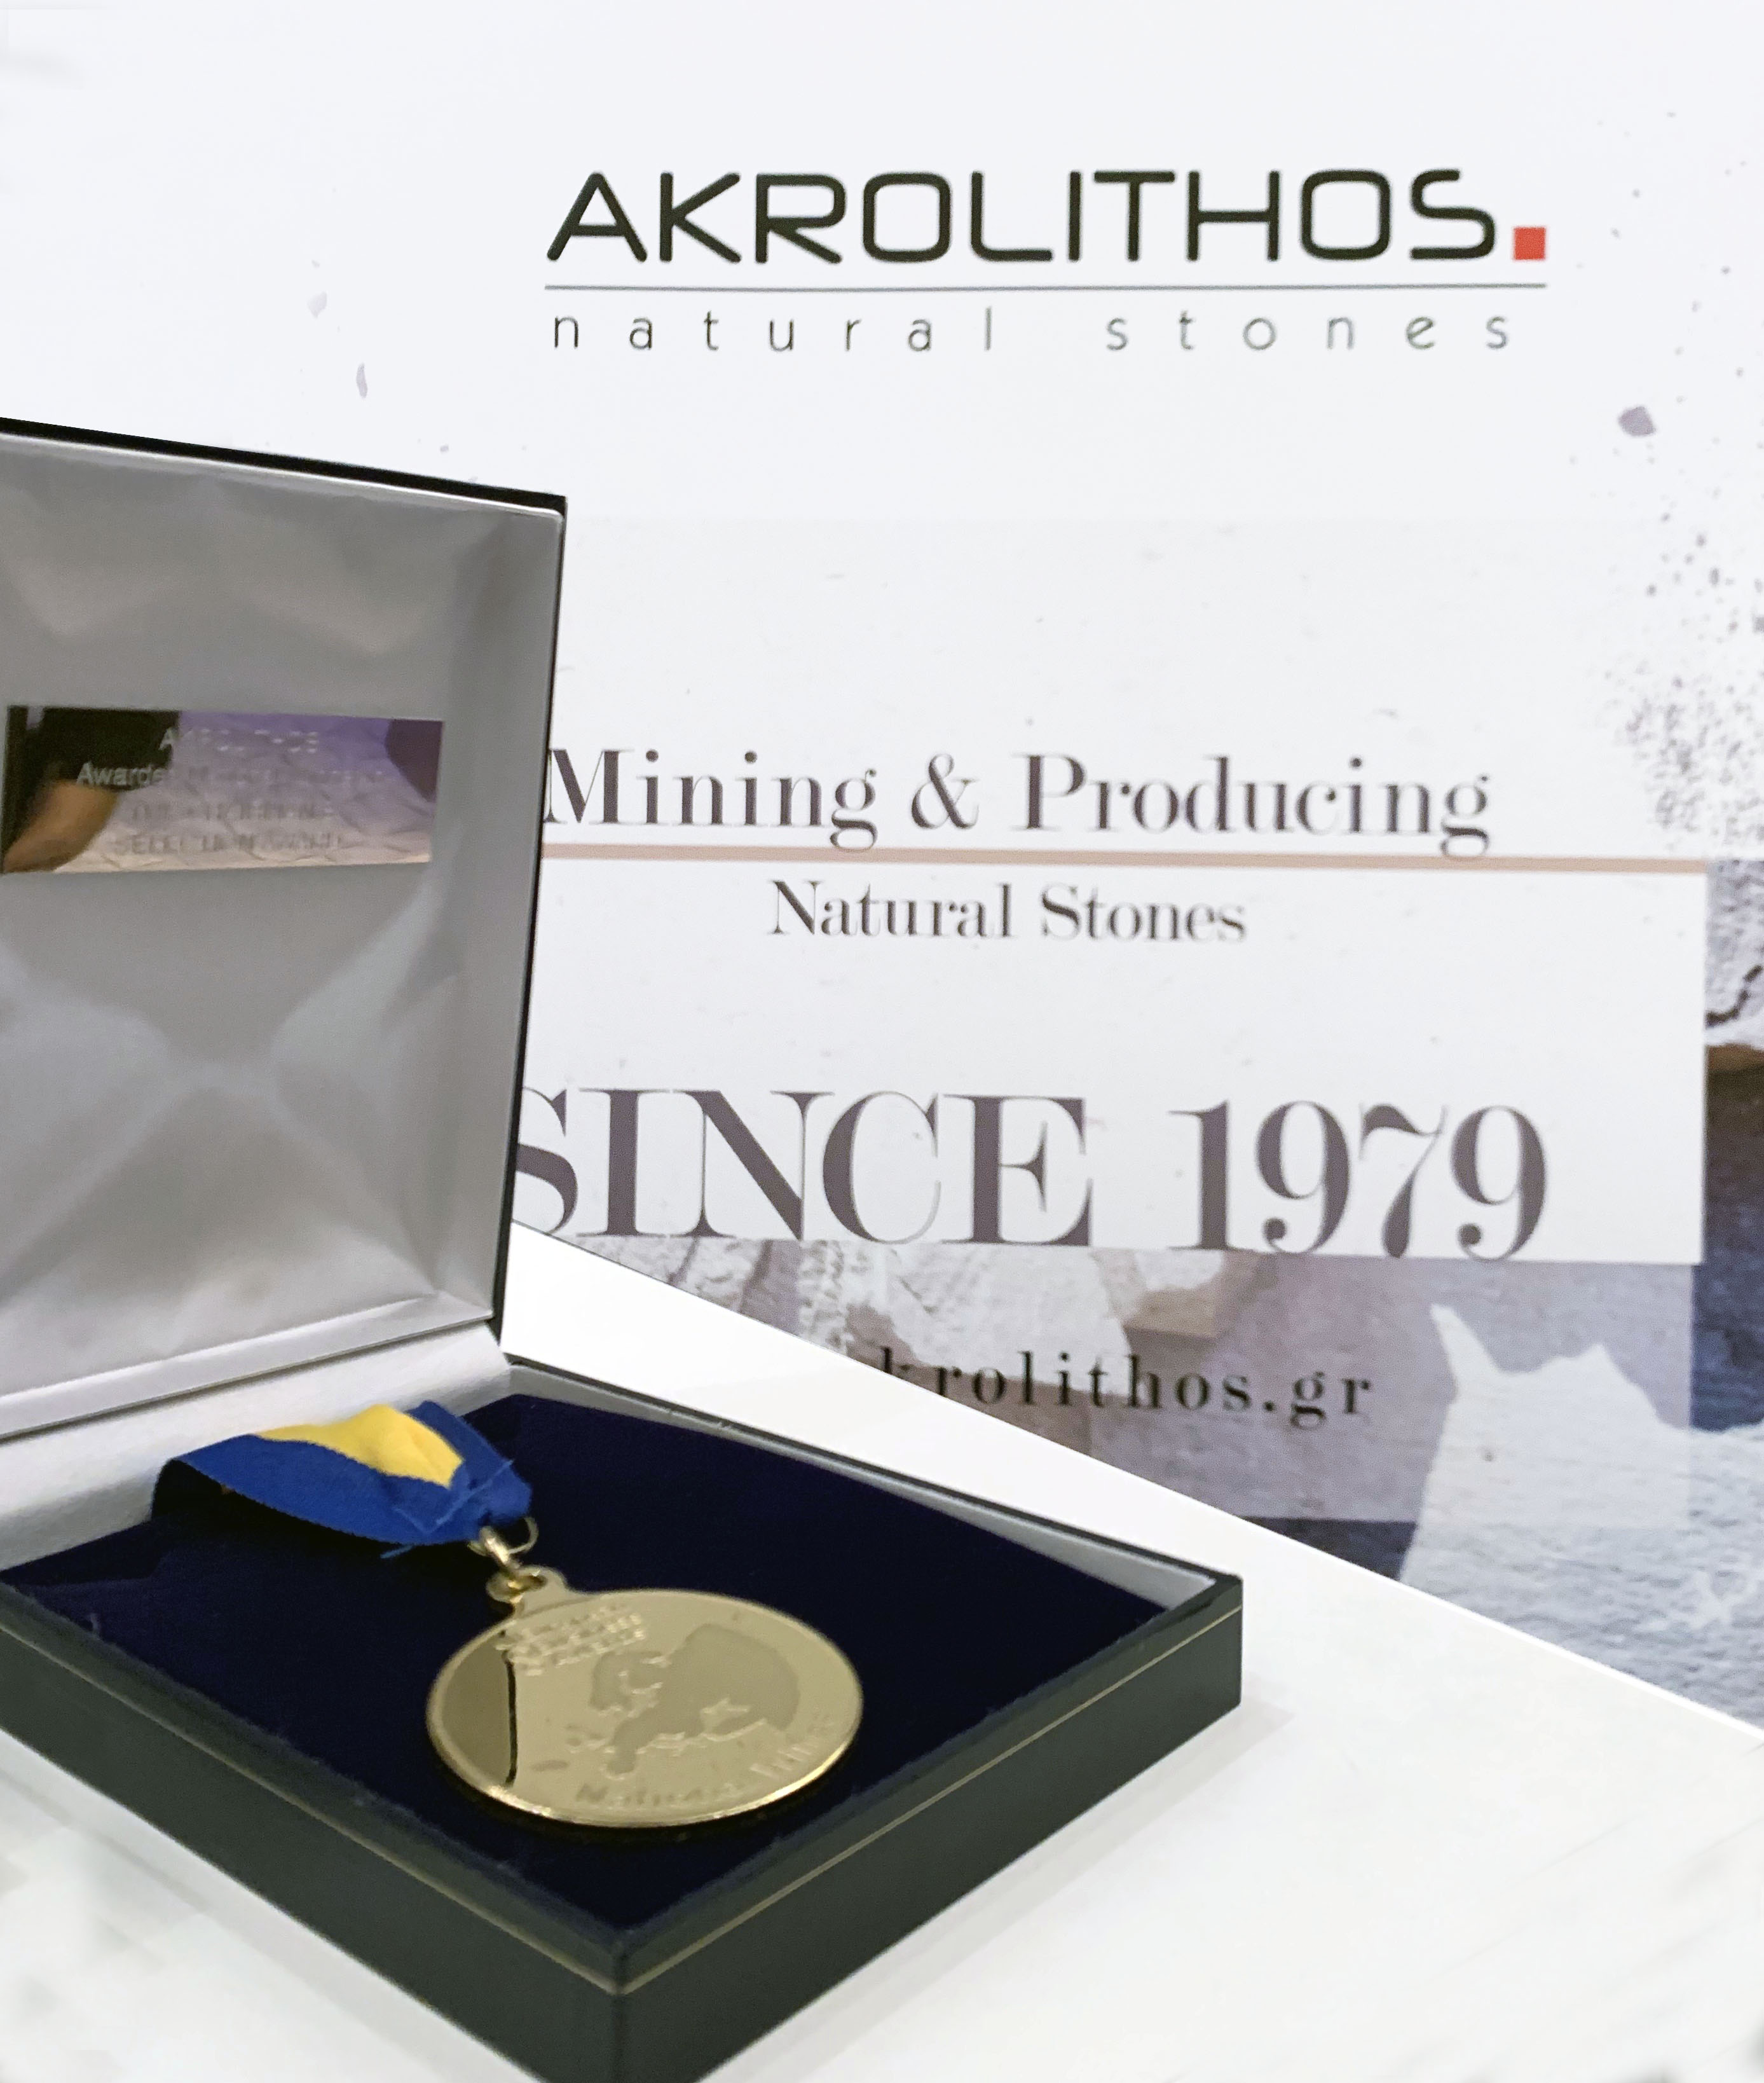 AKROLITHOS S.A. is awarded for the third time at the European Business Awards